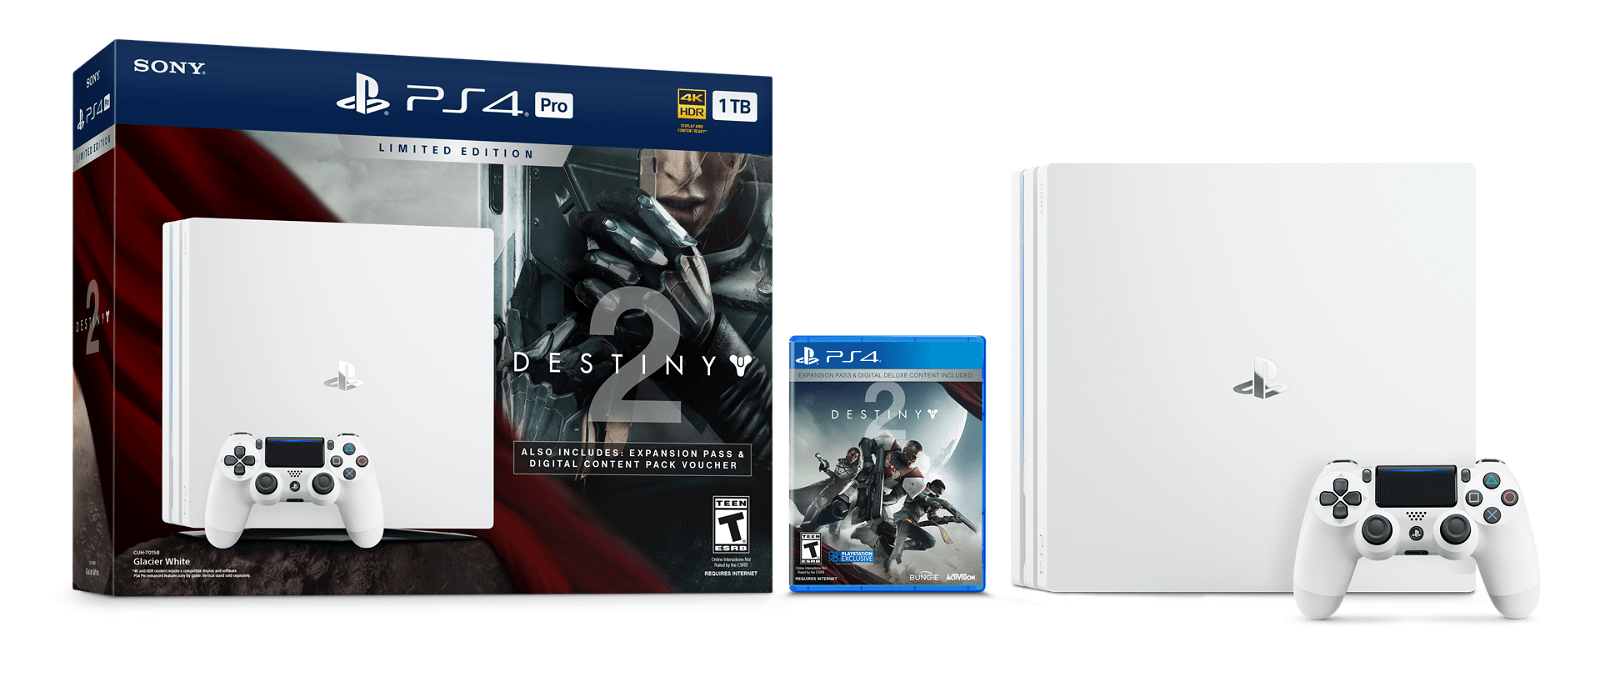 Destiny 2 Limited Edition Playstation 4 Pro Console Announced